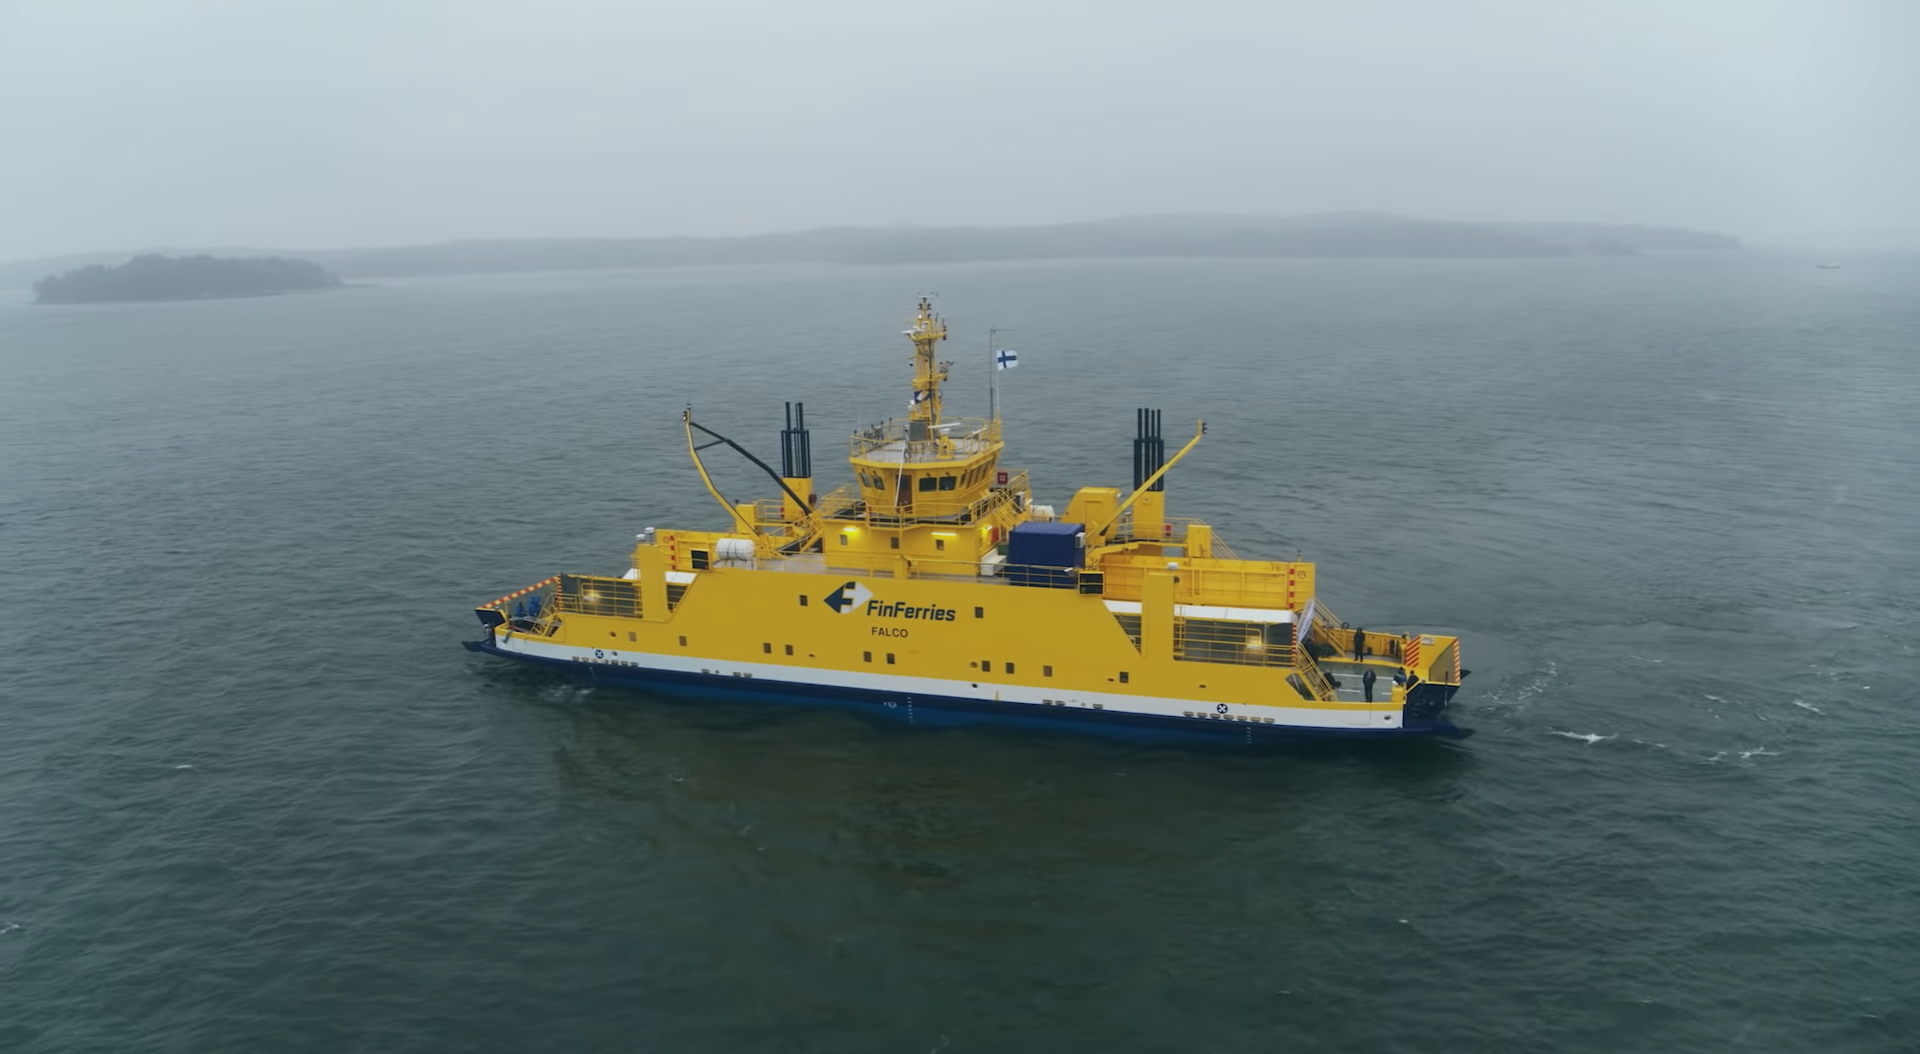 Rolls-Royce and Finferries tested the world’s first fully autonomous ship